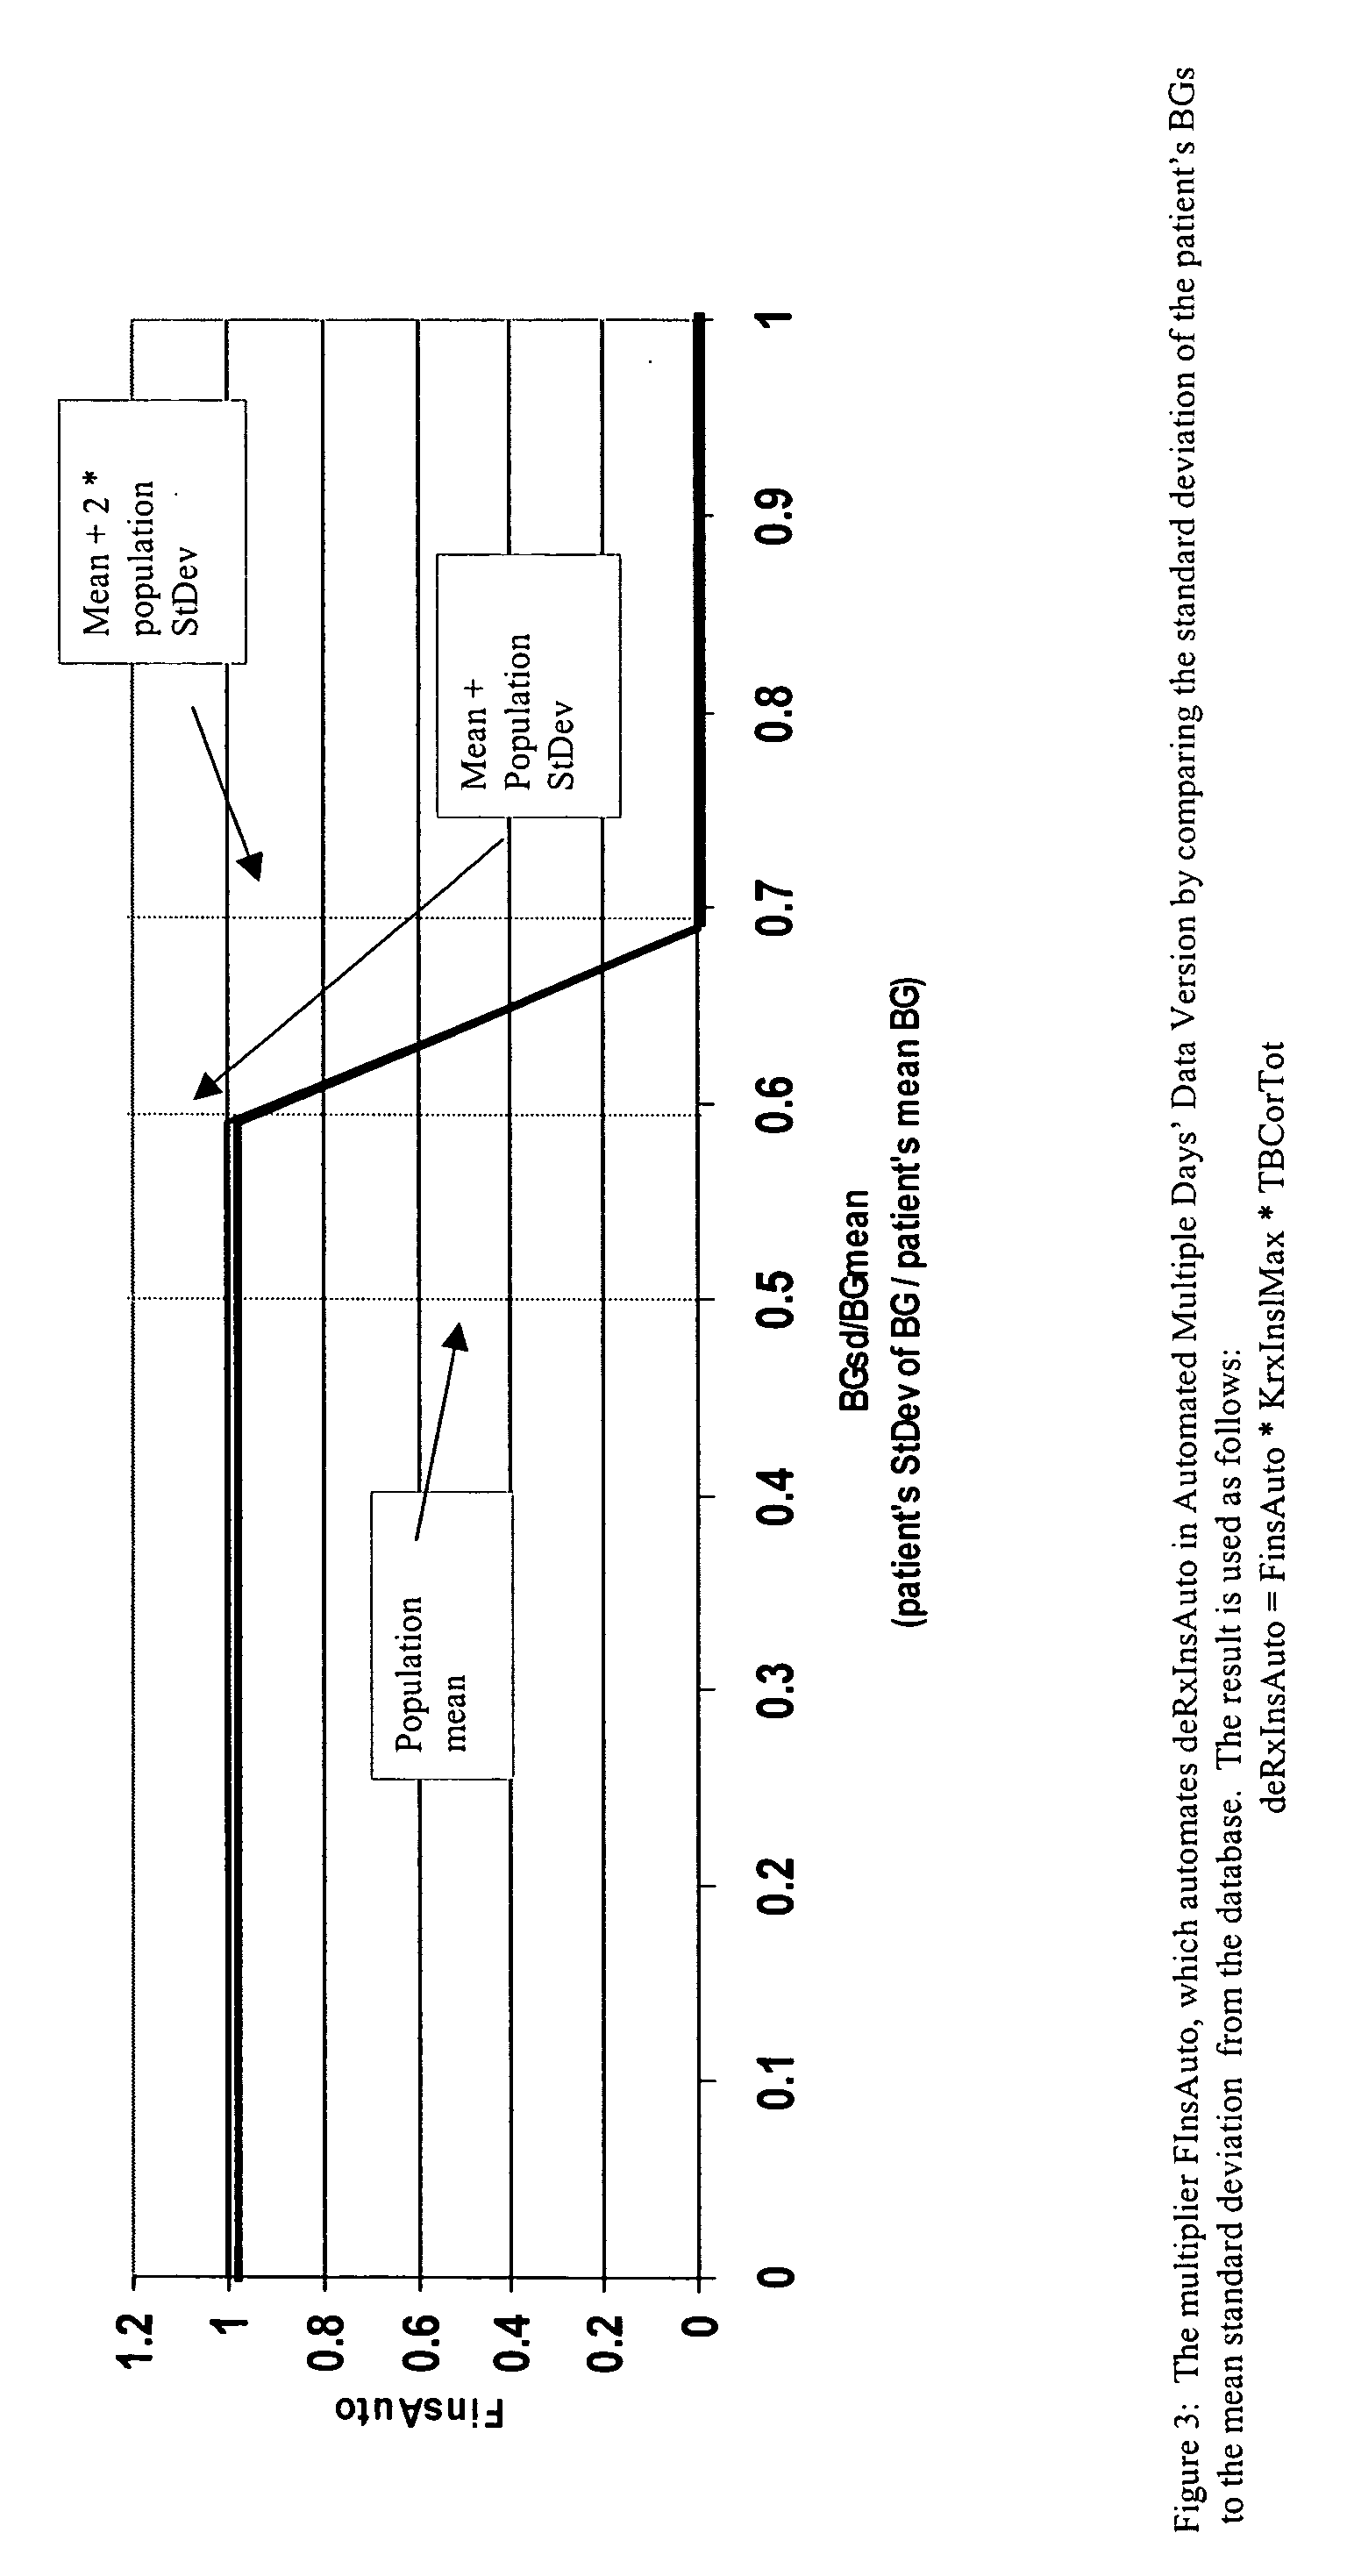 Method and system for determining insulin dosing schedules and carbohydrate-to-insulin ratios in diabetic patients